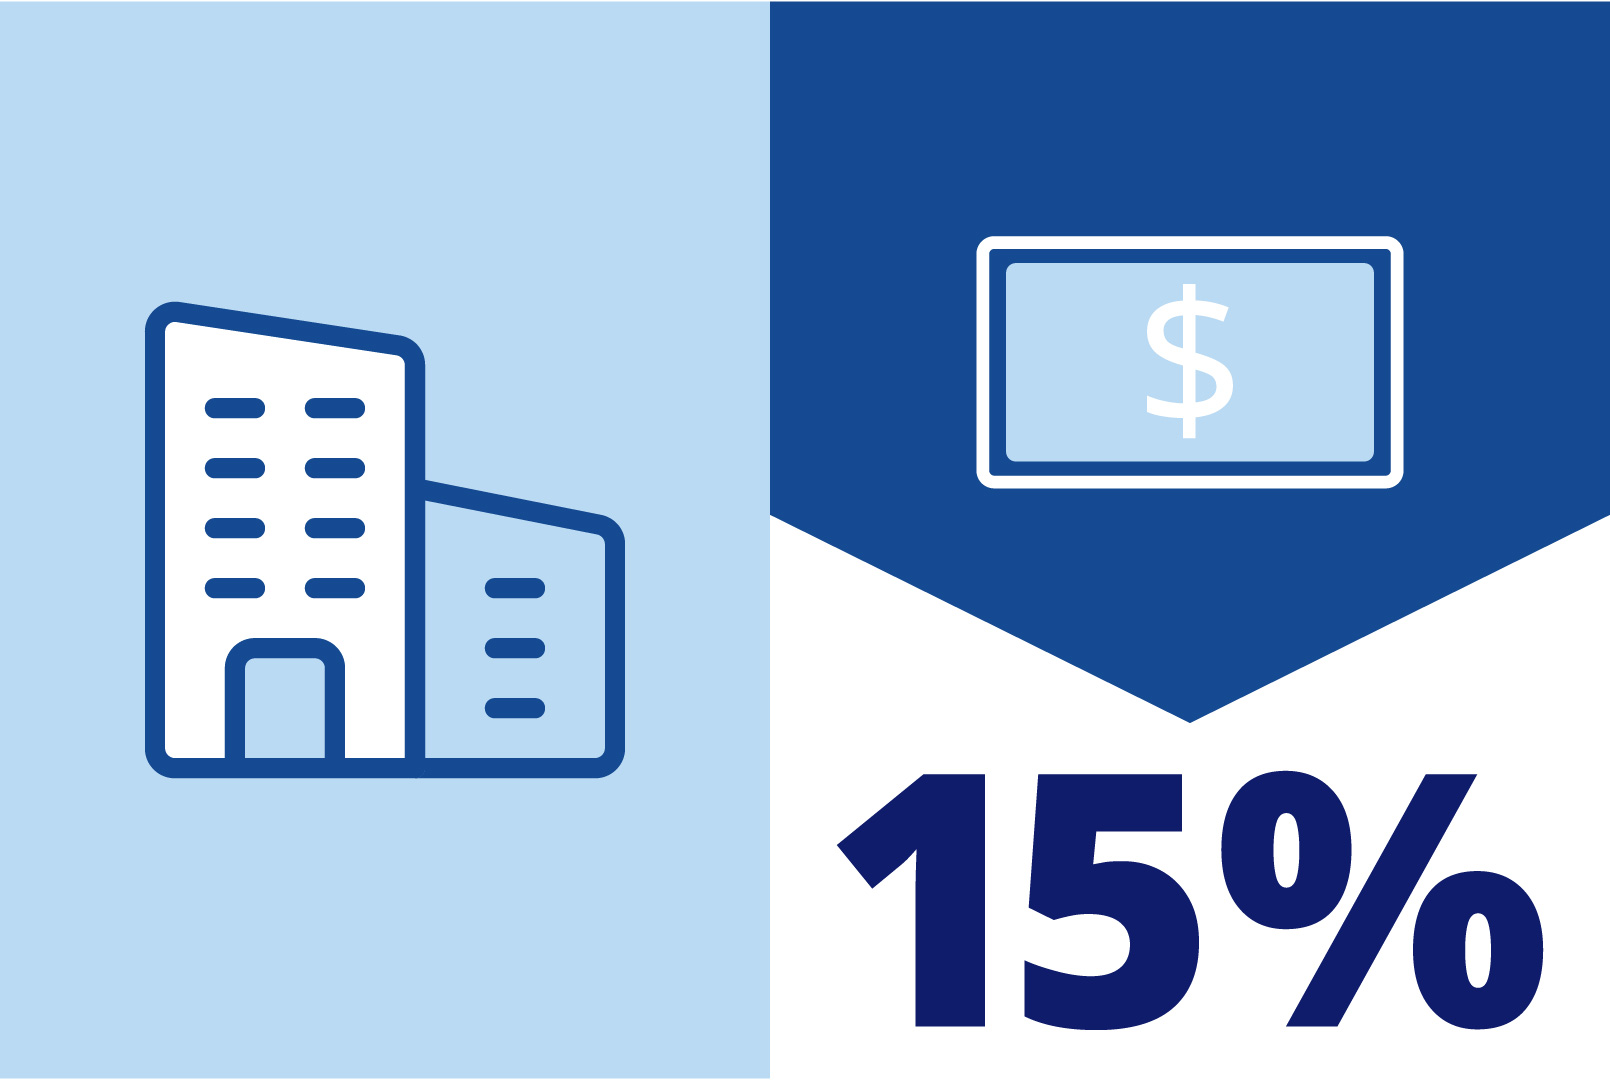 15% Reduction Cost graphic